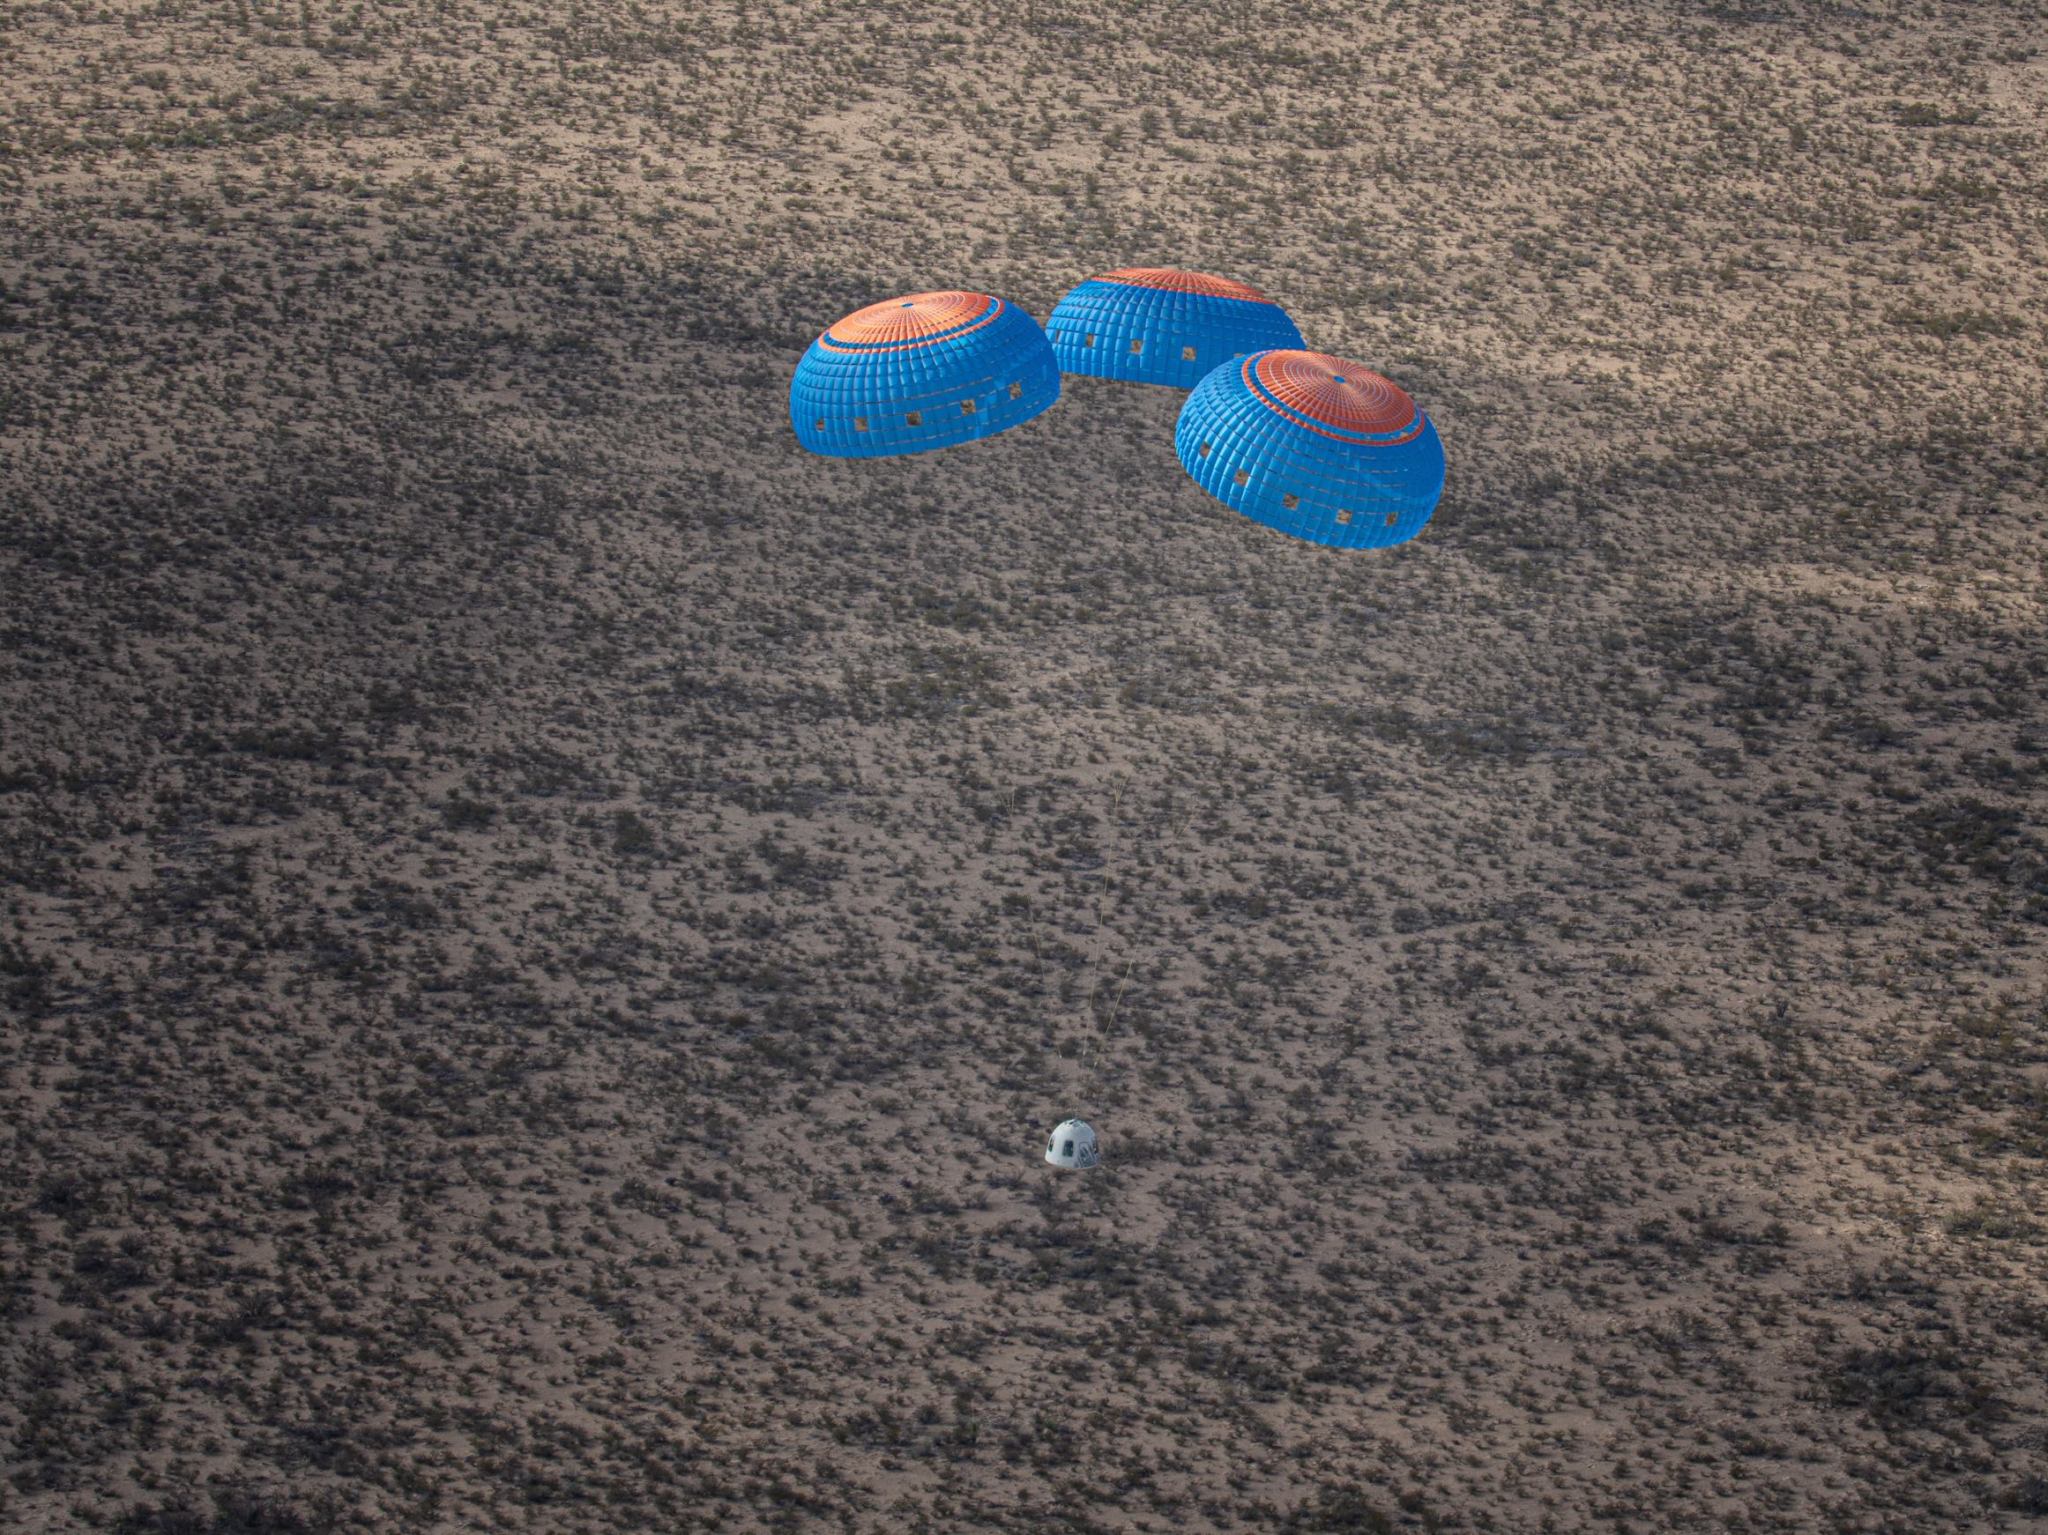 Capsule descending to Earth, attached to parachutes.